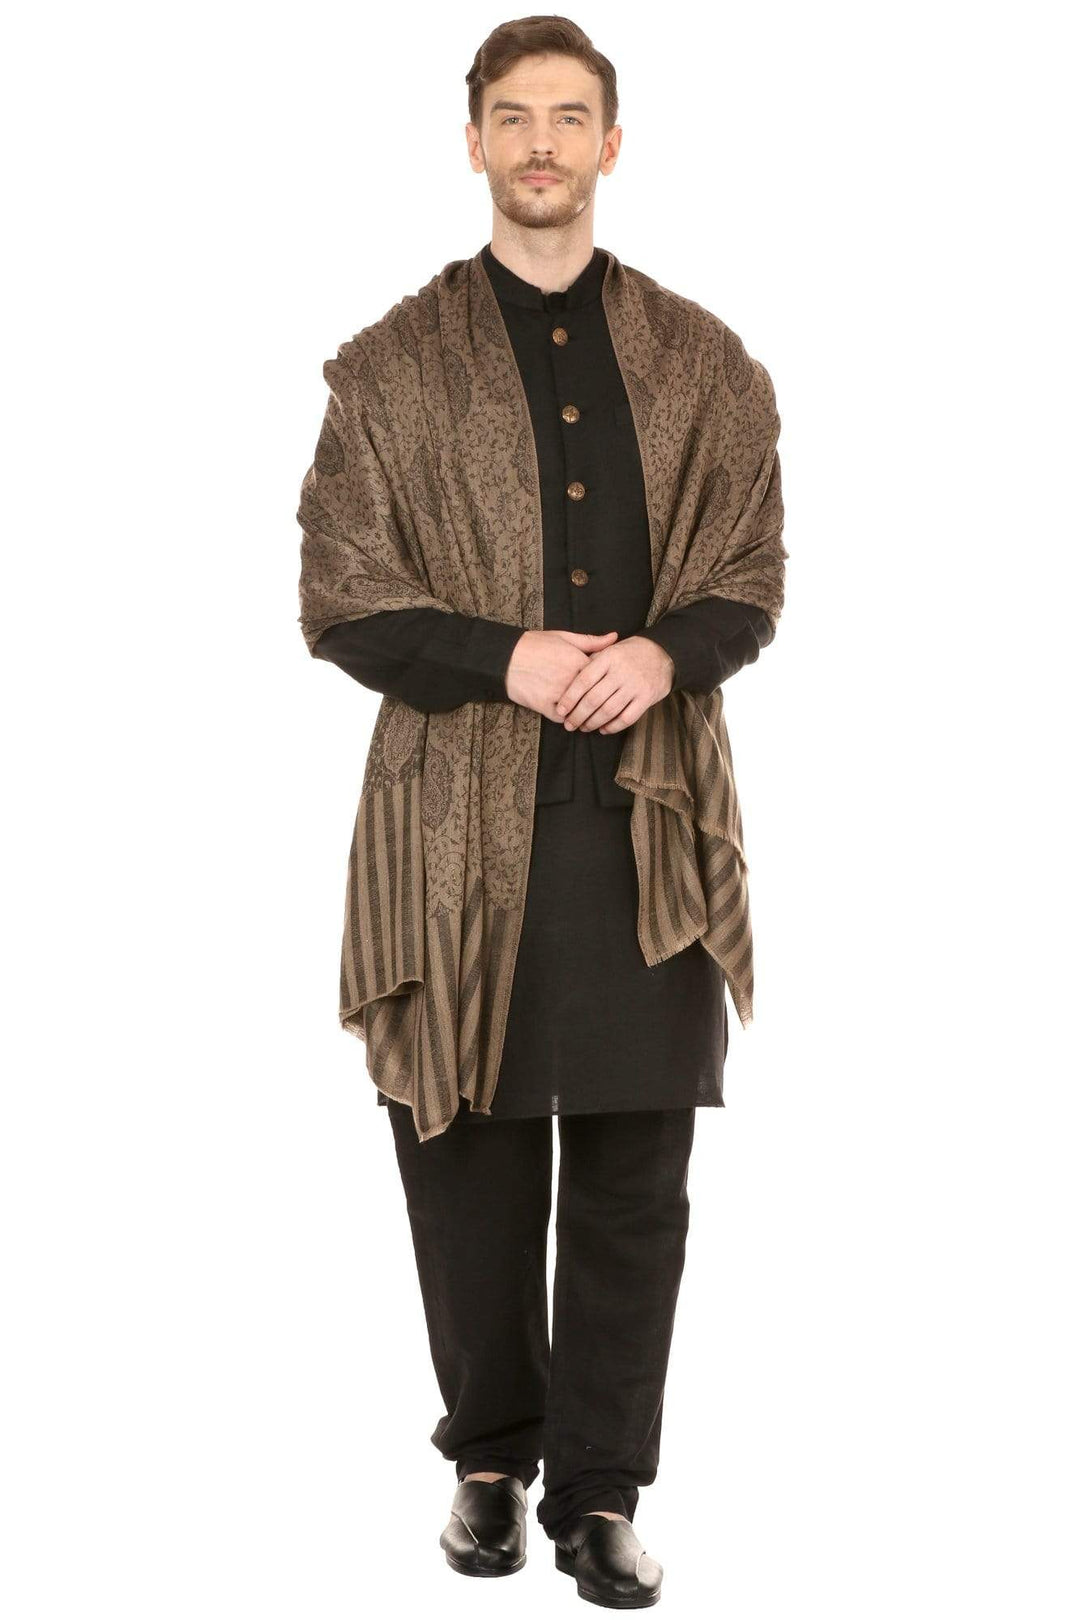 Pashtush Mens Stole Scarf, Extra Soft Wool - Taupe